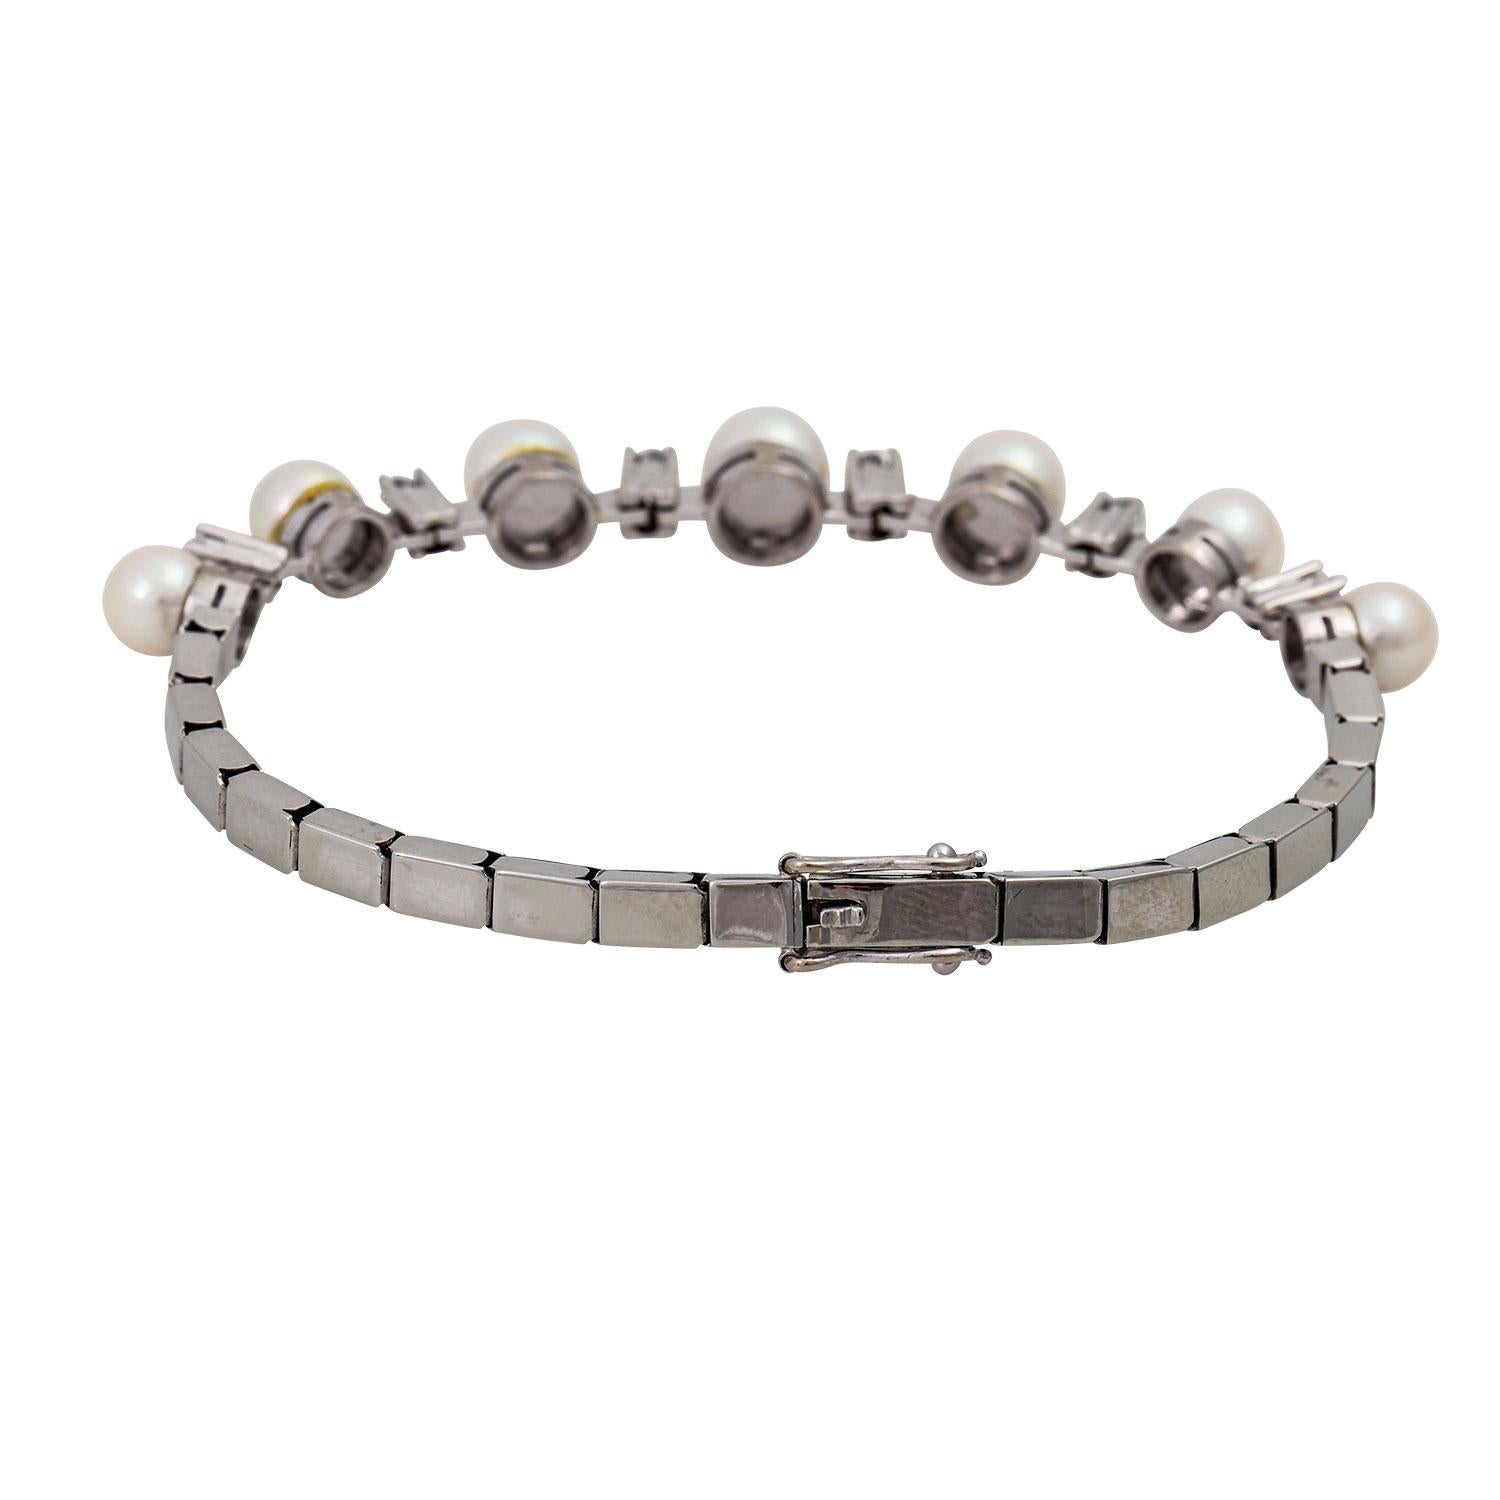 Bracelet with 7 cultured pearls, 6 brilliant-cut diamonds totaling approx. 0.64 ct W/VSI, WG 18K, L: approx. 18 cm, box clasp with safety eight.
